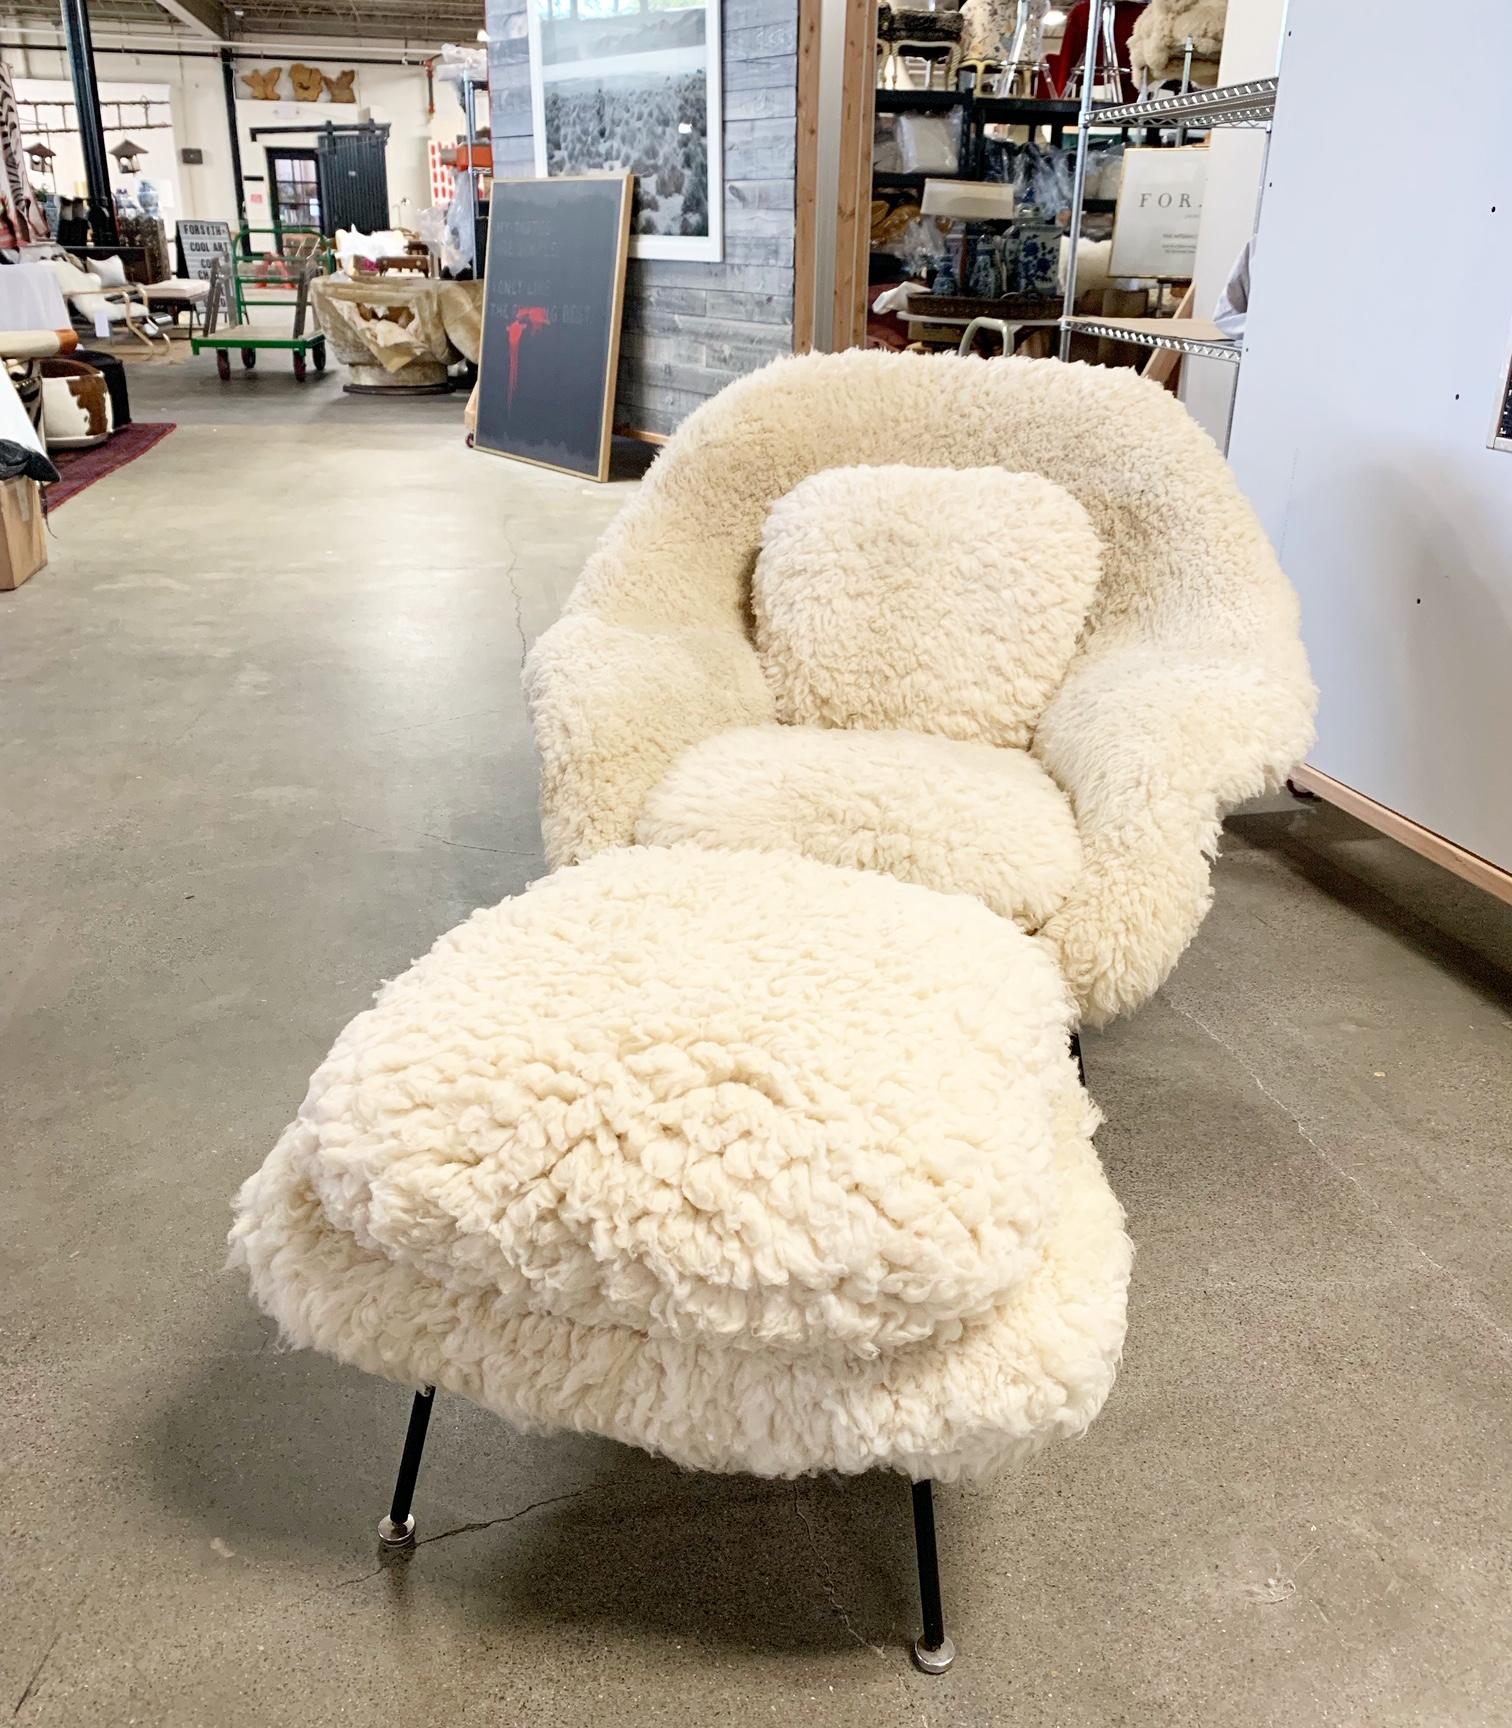 Our master upholsters restored this Saarinen ottoman in our cool California sheepskins to match our womb chair in California sheepskin.